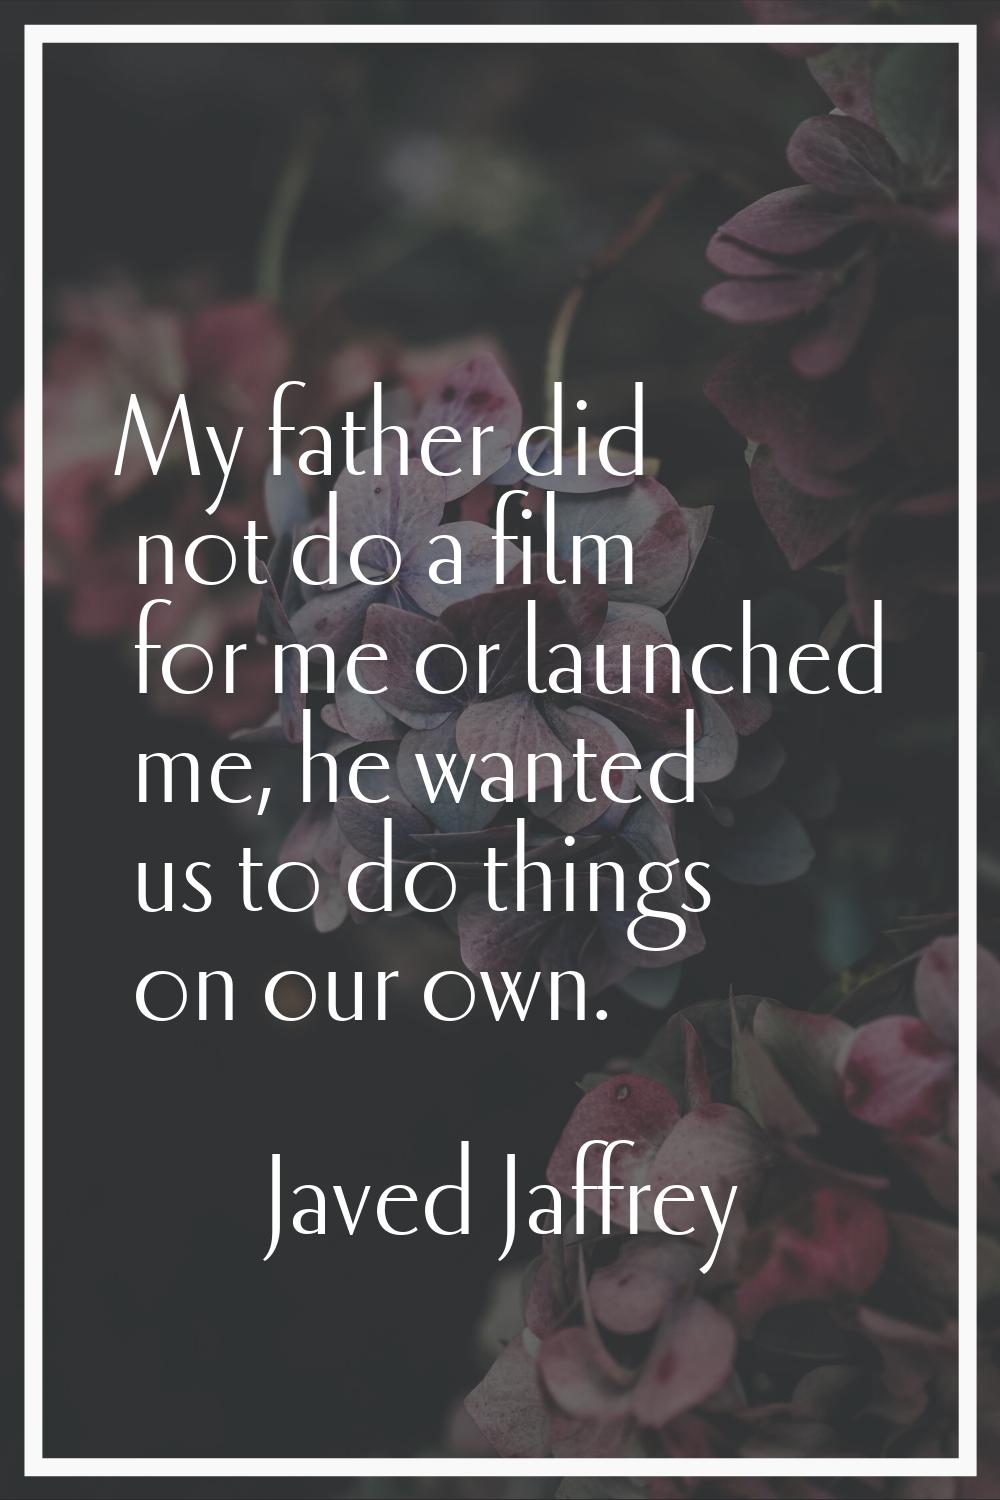 My father did not do a film for me or launched me, he wanted us to do things on our own.